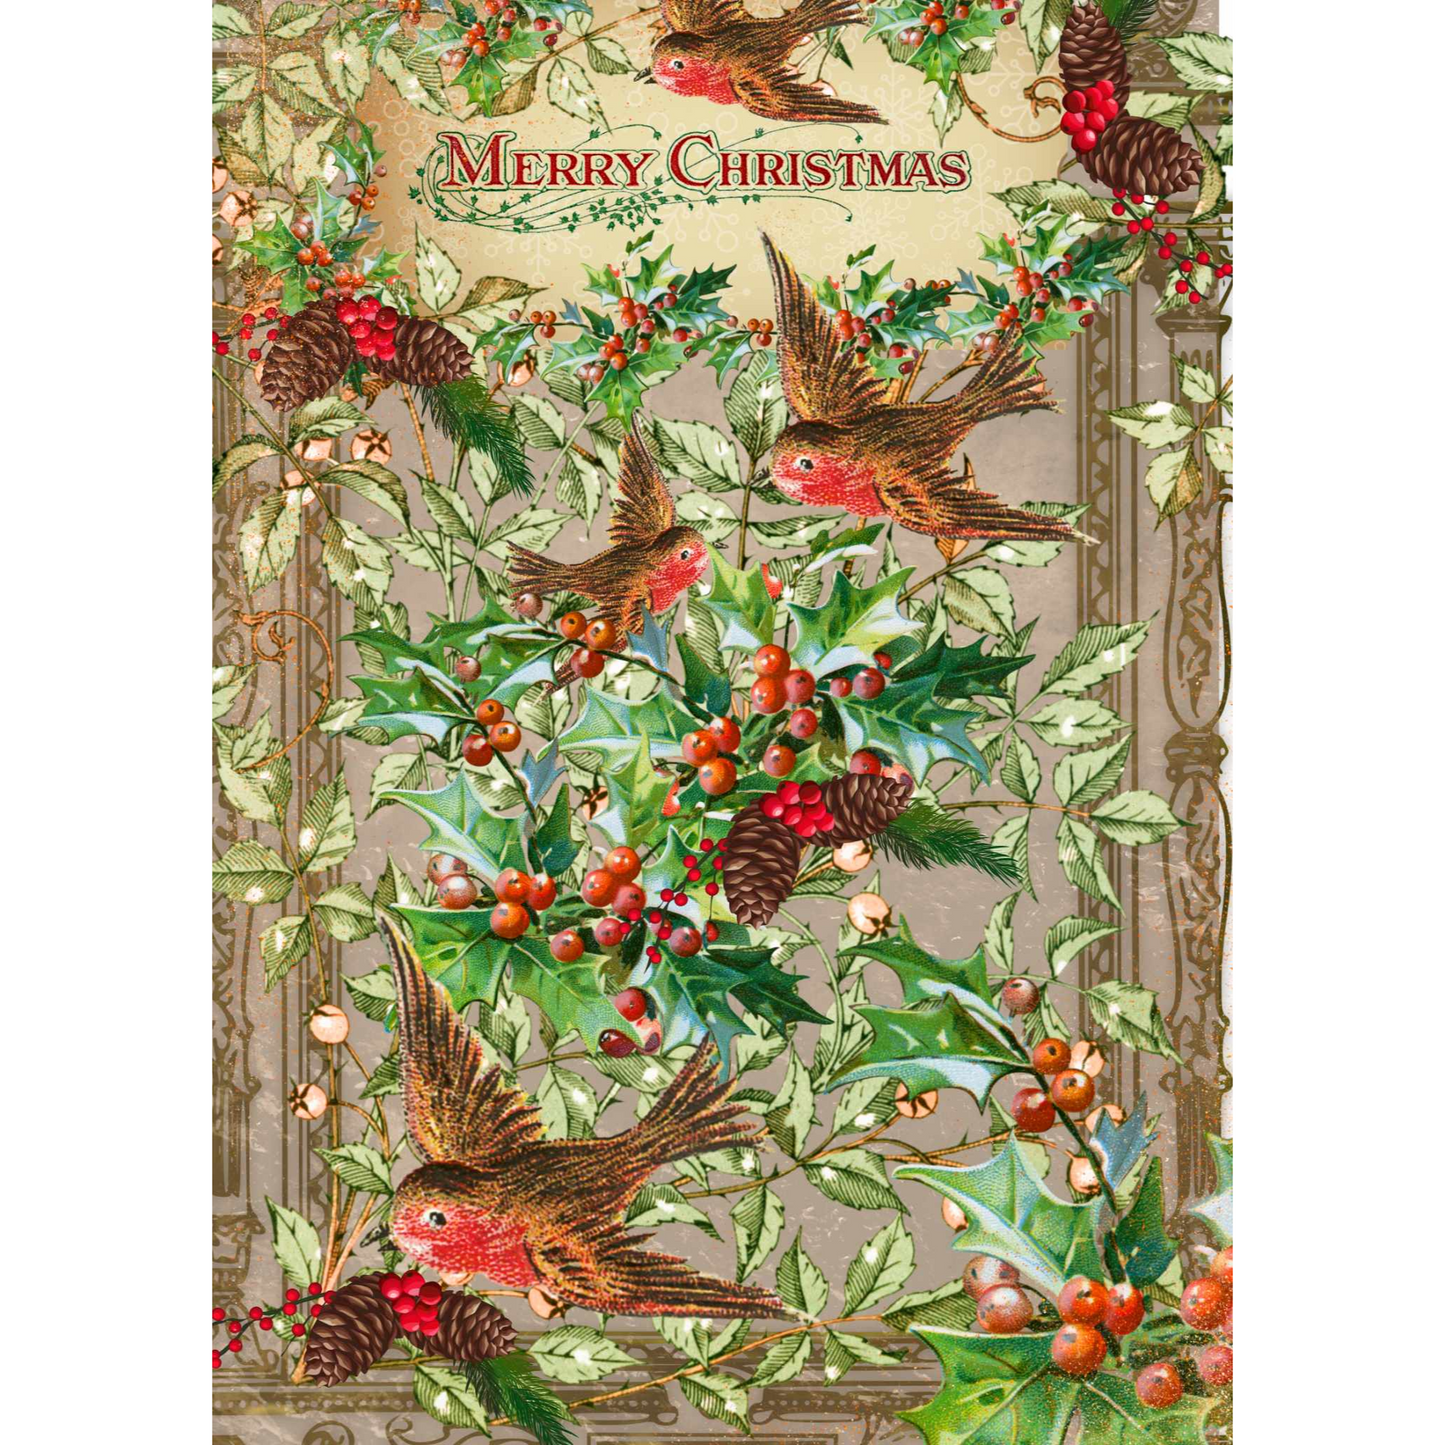 "Old Time Christmas" 3 sheet decoupage paper set by Made By Marley. Sheet #2 of 3.  Available at Milton's Daughter.